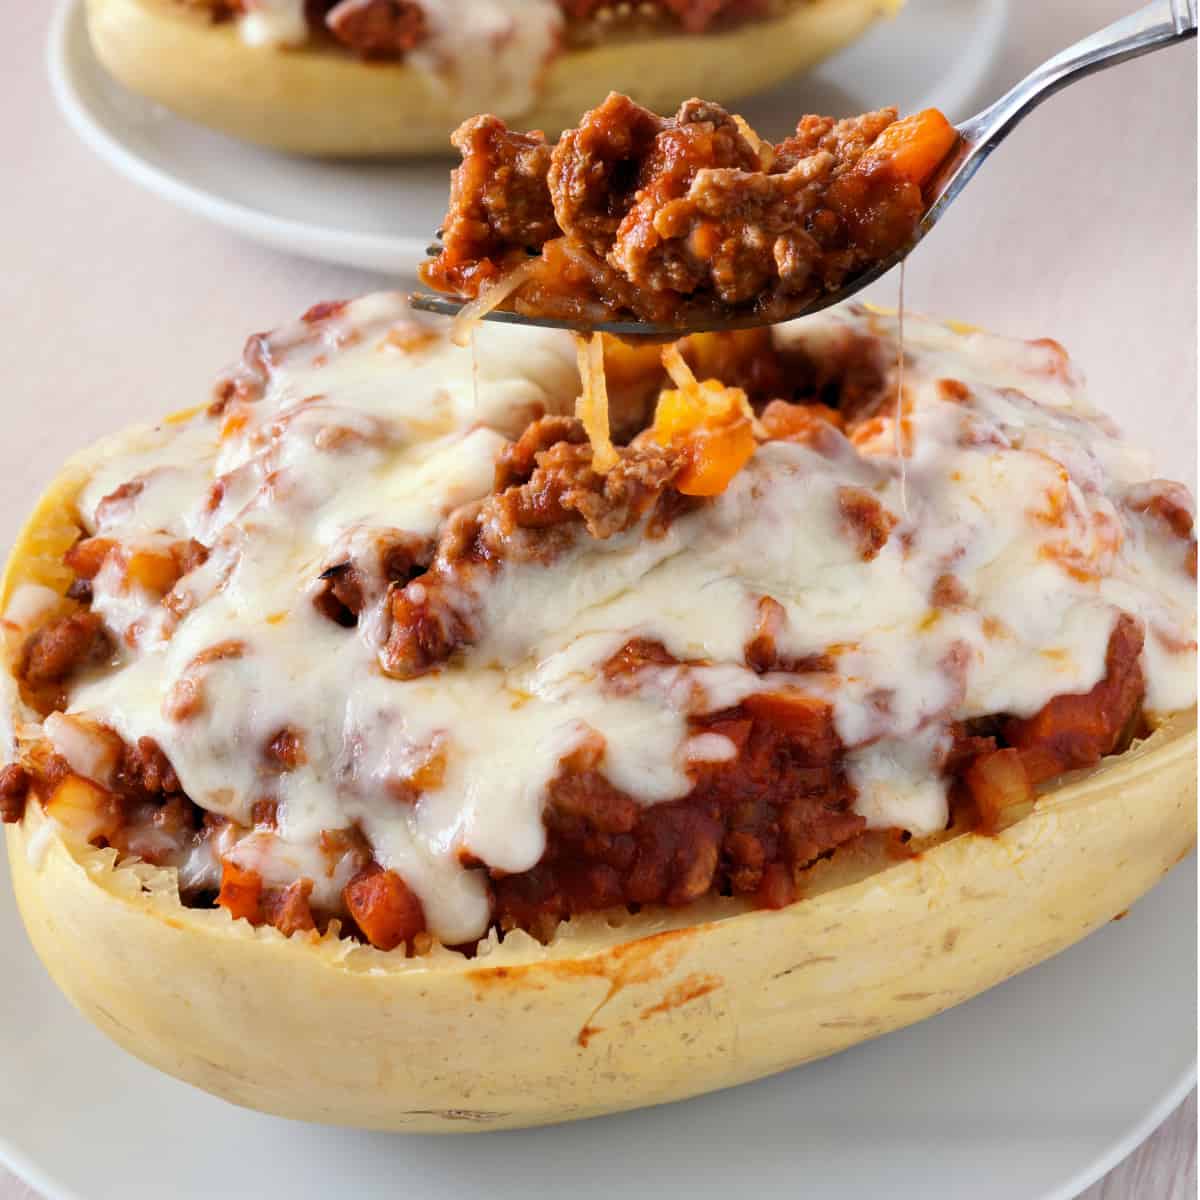 air fried spaghetti squash with pasta sauce and cheese melted on top.